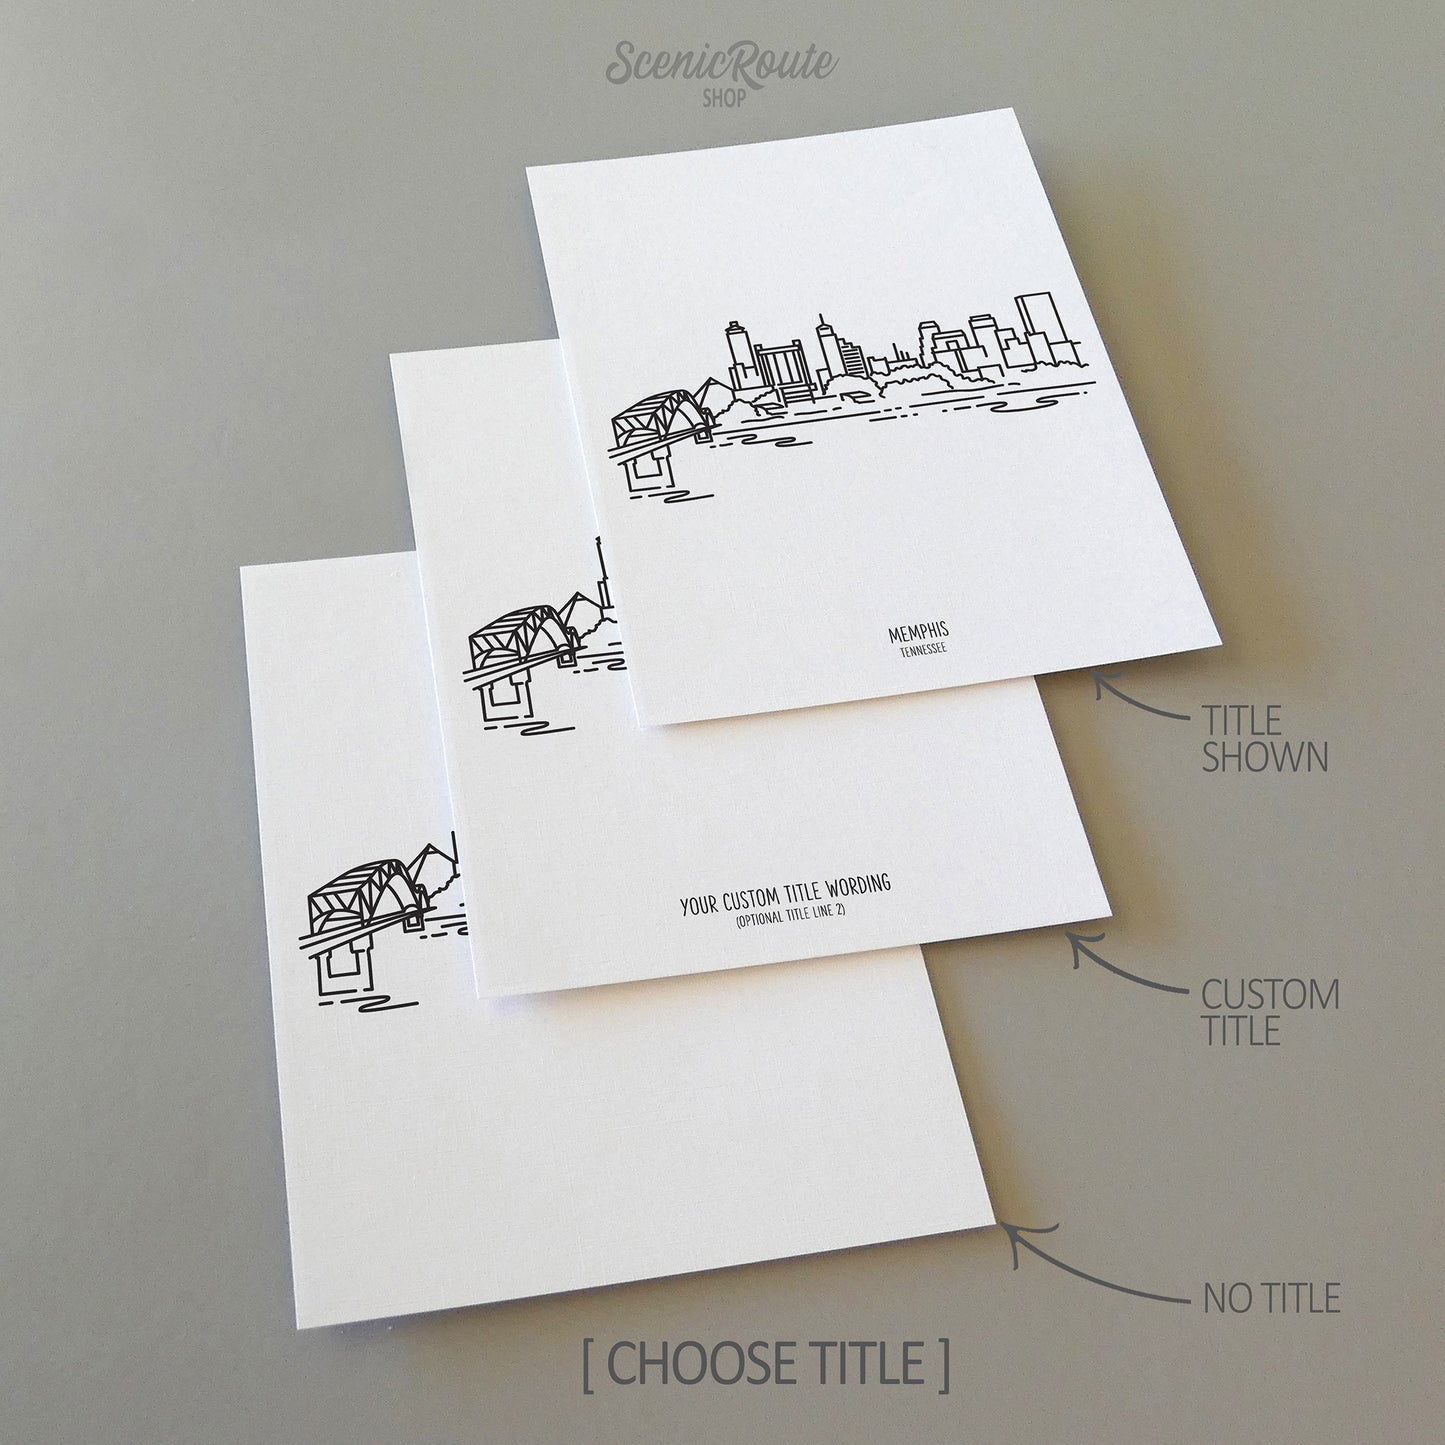 Three line art drawings of the Memphis Tennessee Skyline on white linen paper with a gray background. The pieces are shown with title options that can be chosen and personalized.